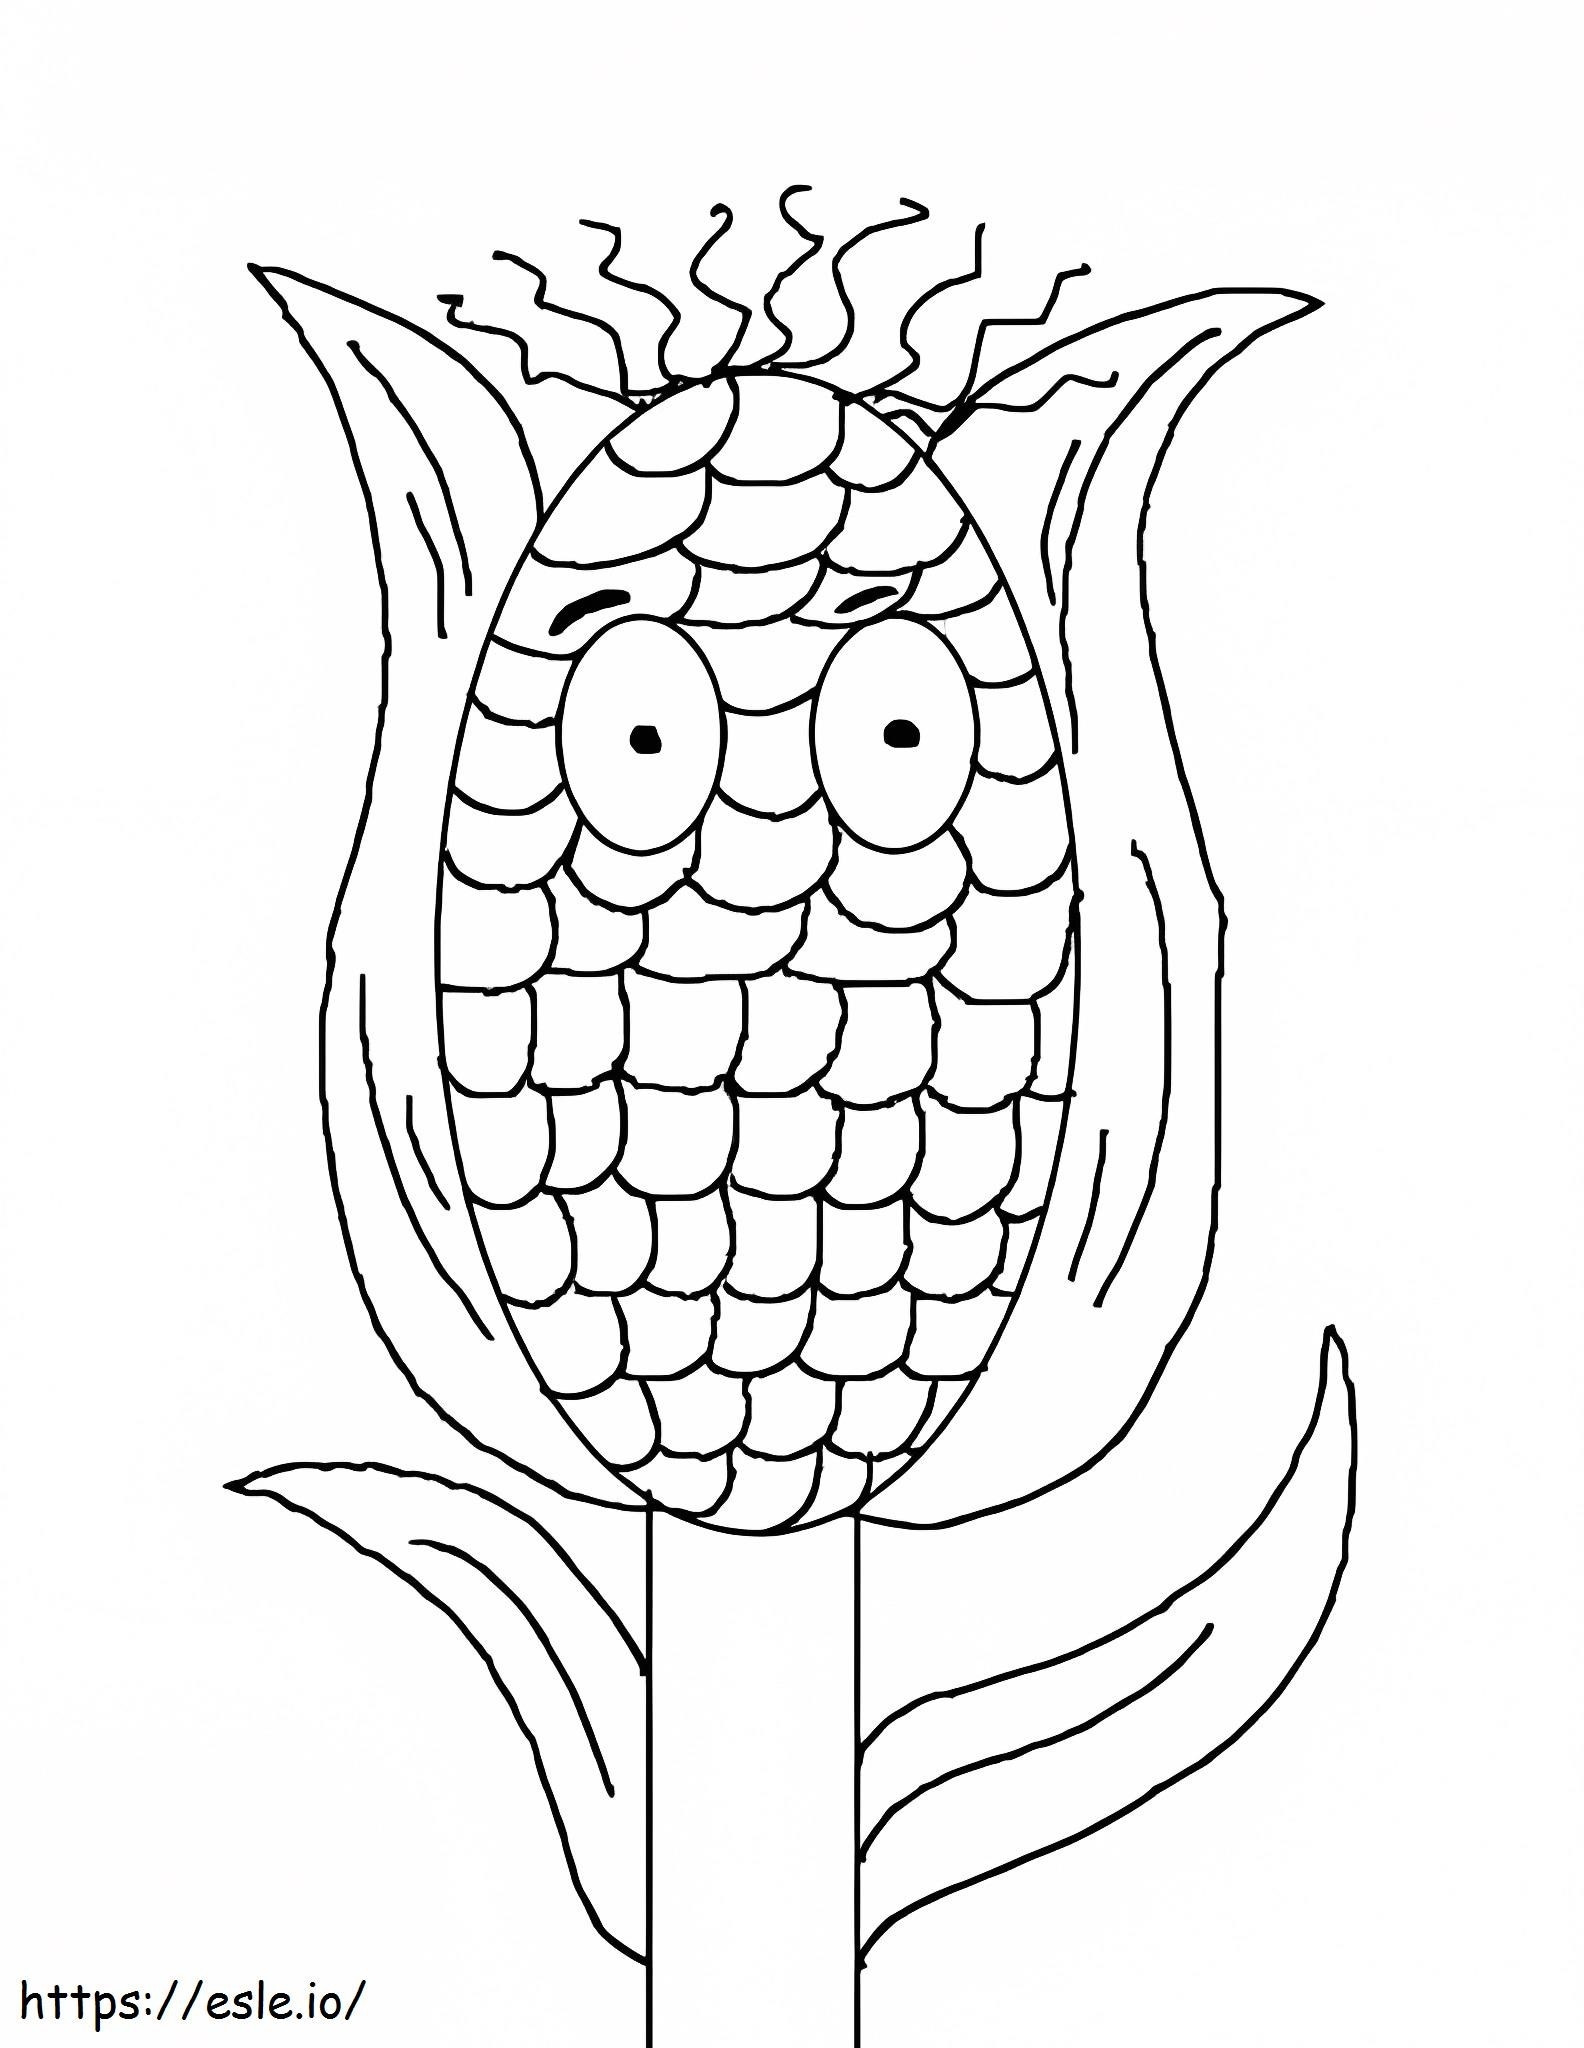 God Made Corn coloring page